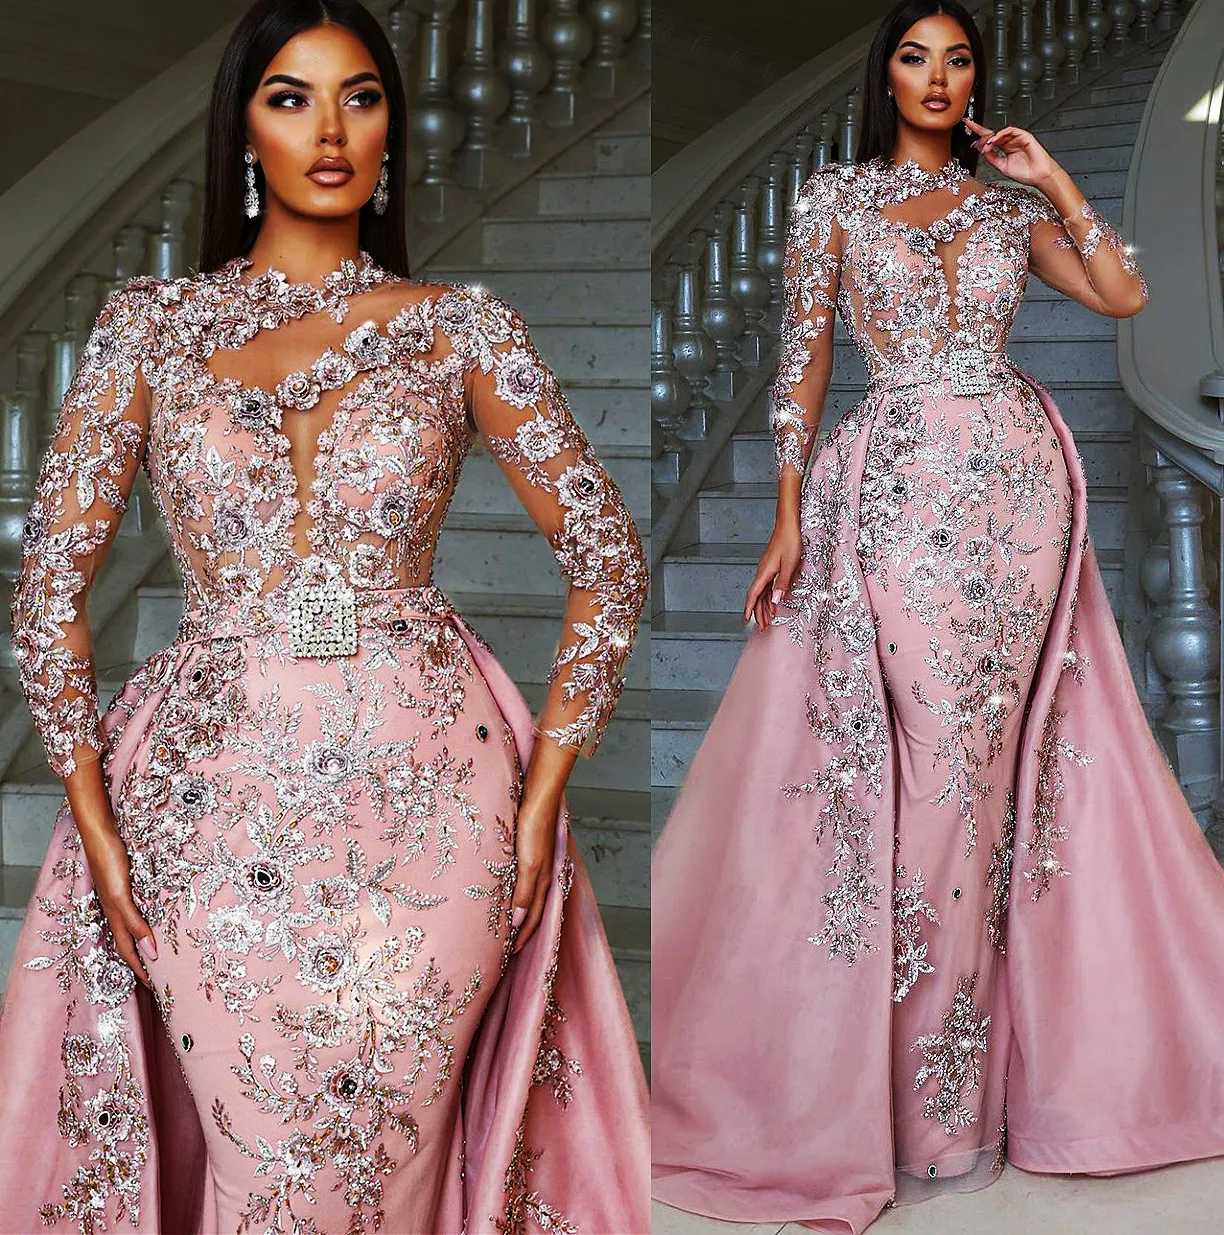 Arabic Pink Ebi Aso Mermaid Prom Dresses D Floral Appliques Evening Formal Party Second Reception Birthday Engagement Gowns Dress ZJ Ress ress